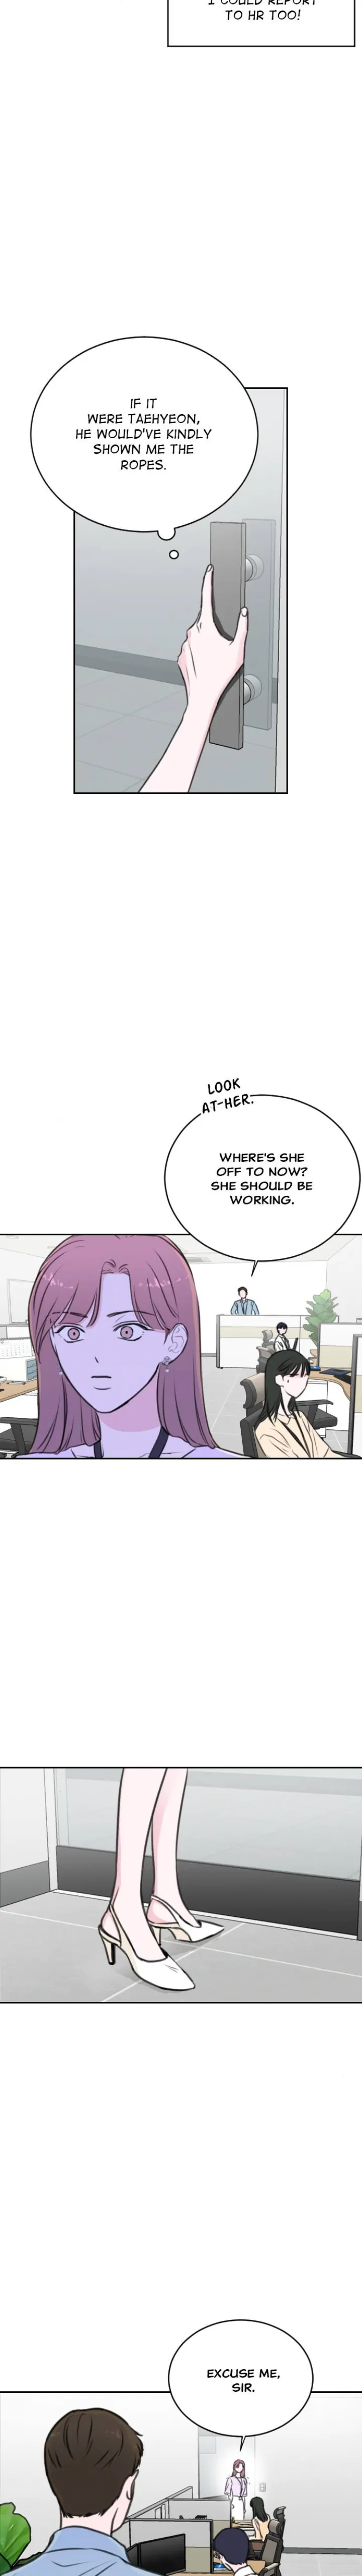 Office Marriage, After a Breakup chapter 19